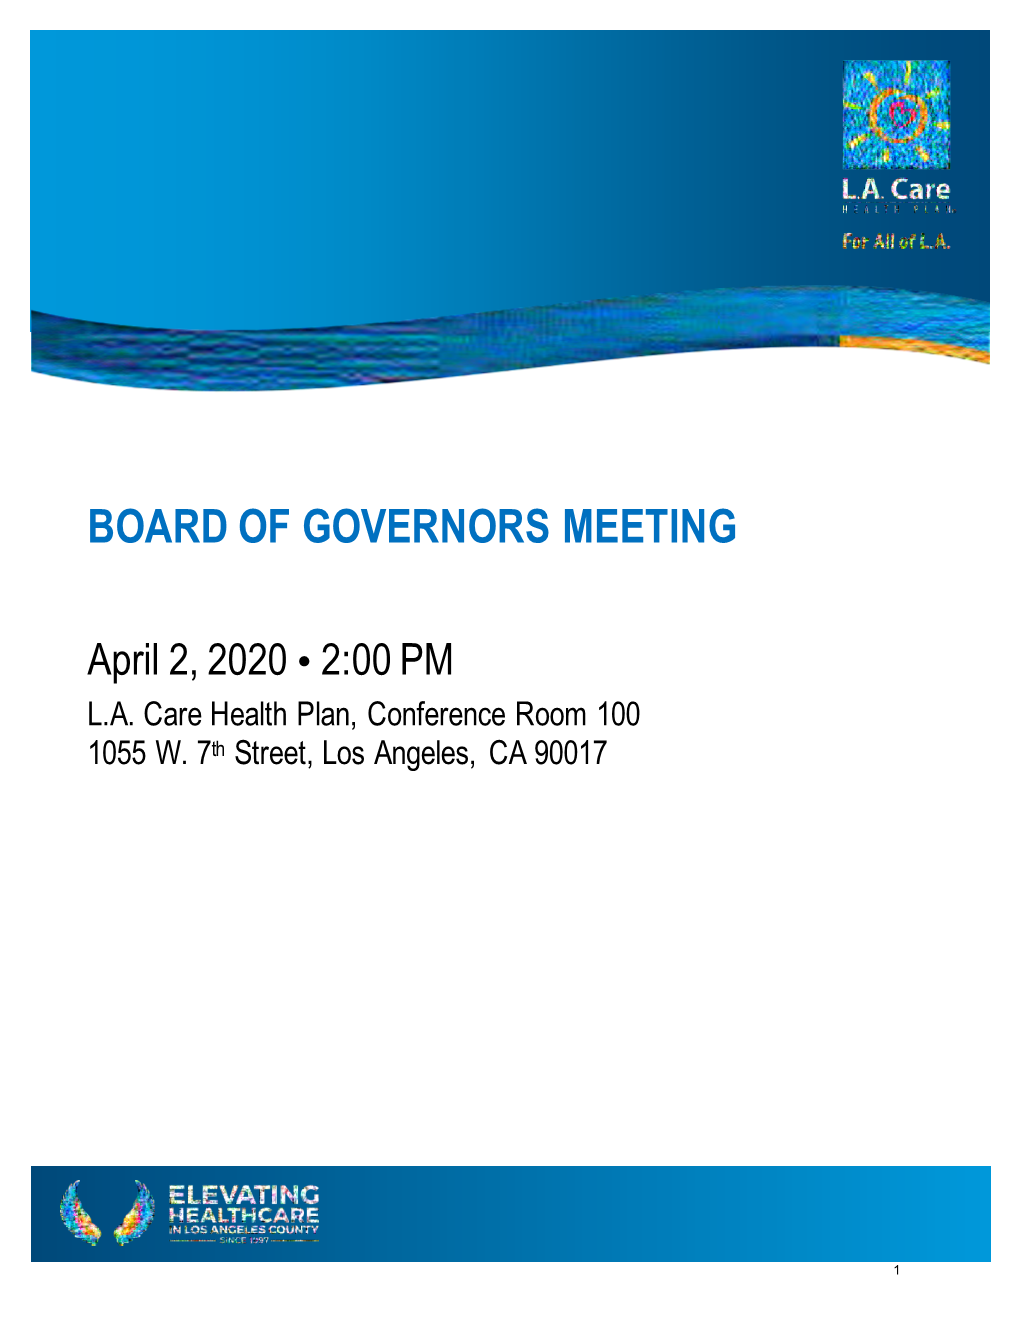 Board of Governors Meeting